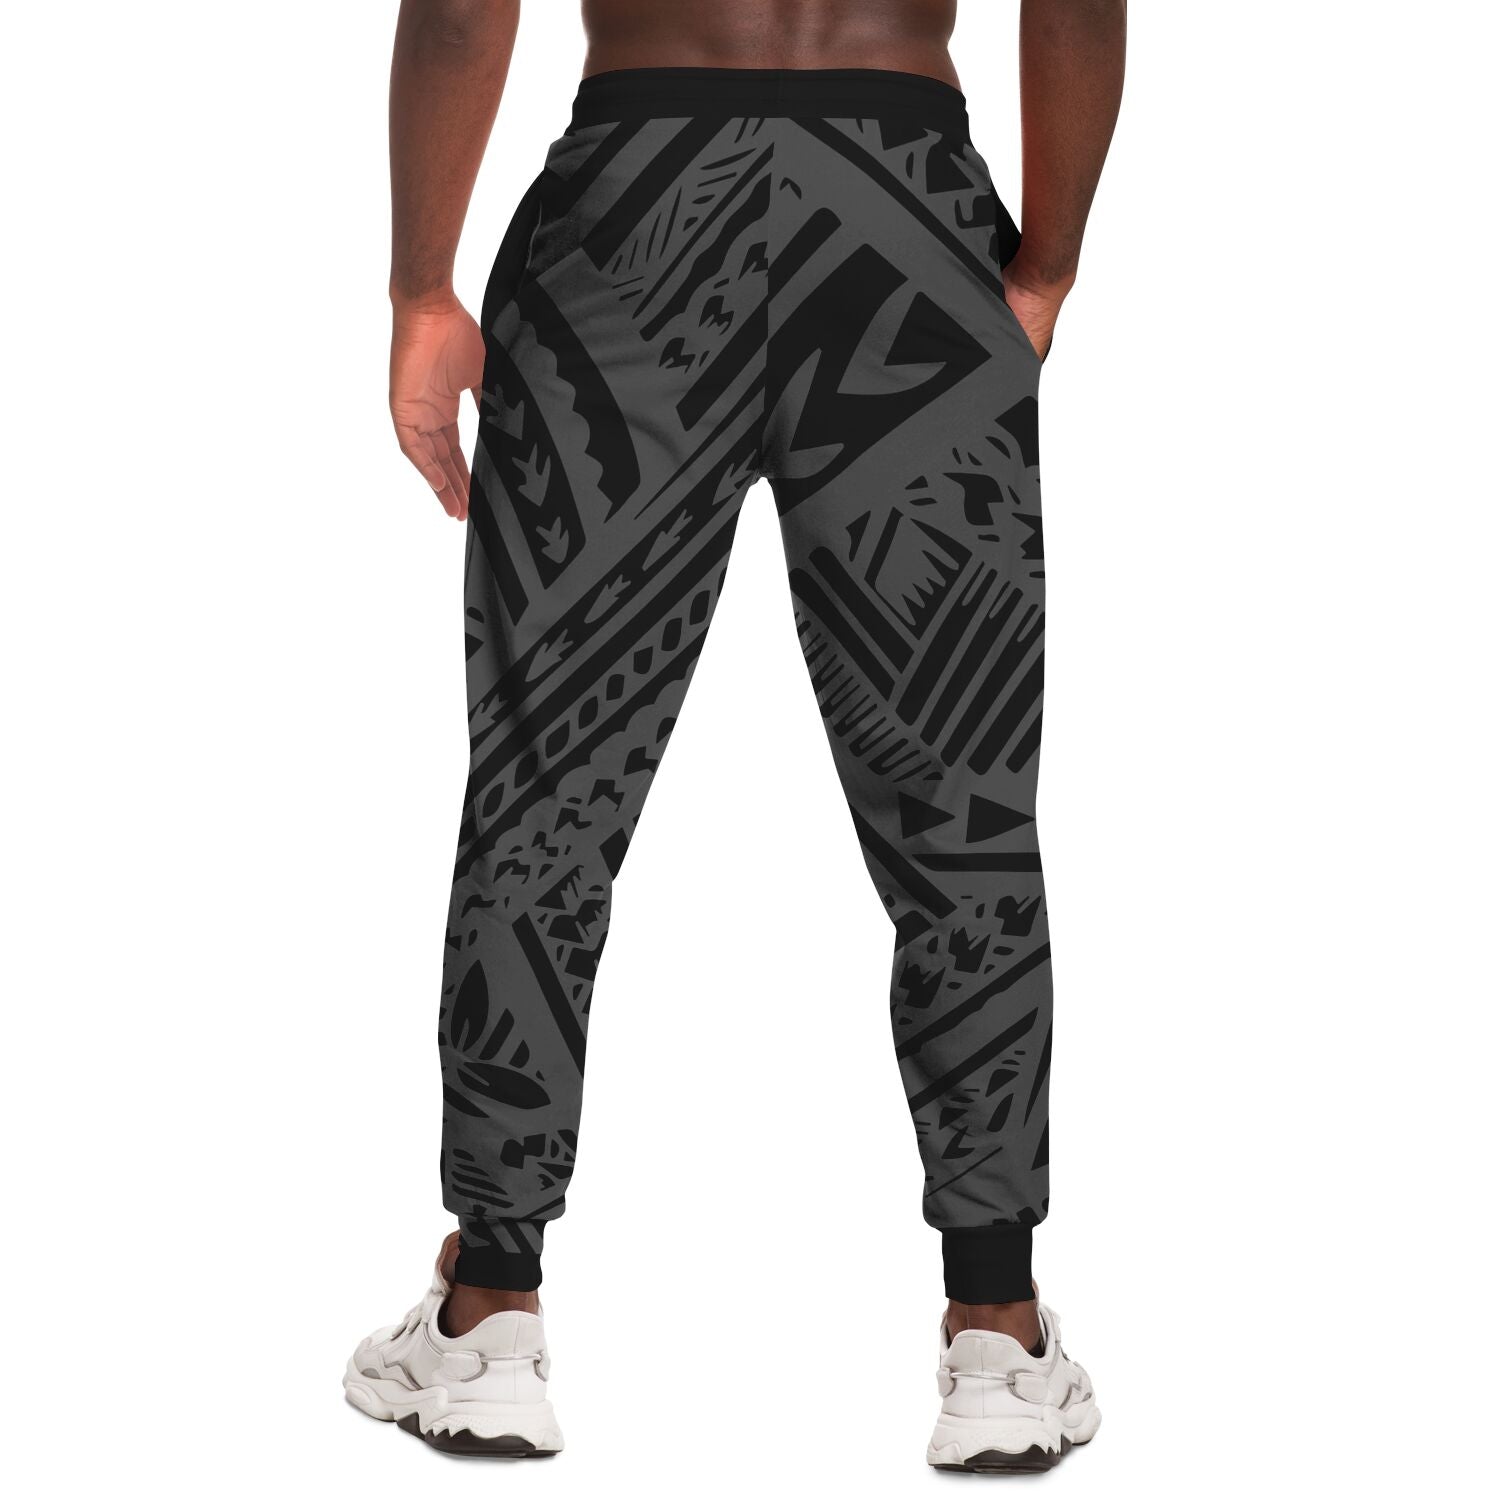 THE SOUTH PACIFIC WAVE ALL-OVER PRINT Joggers-black